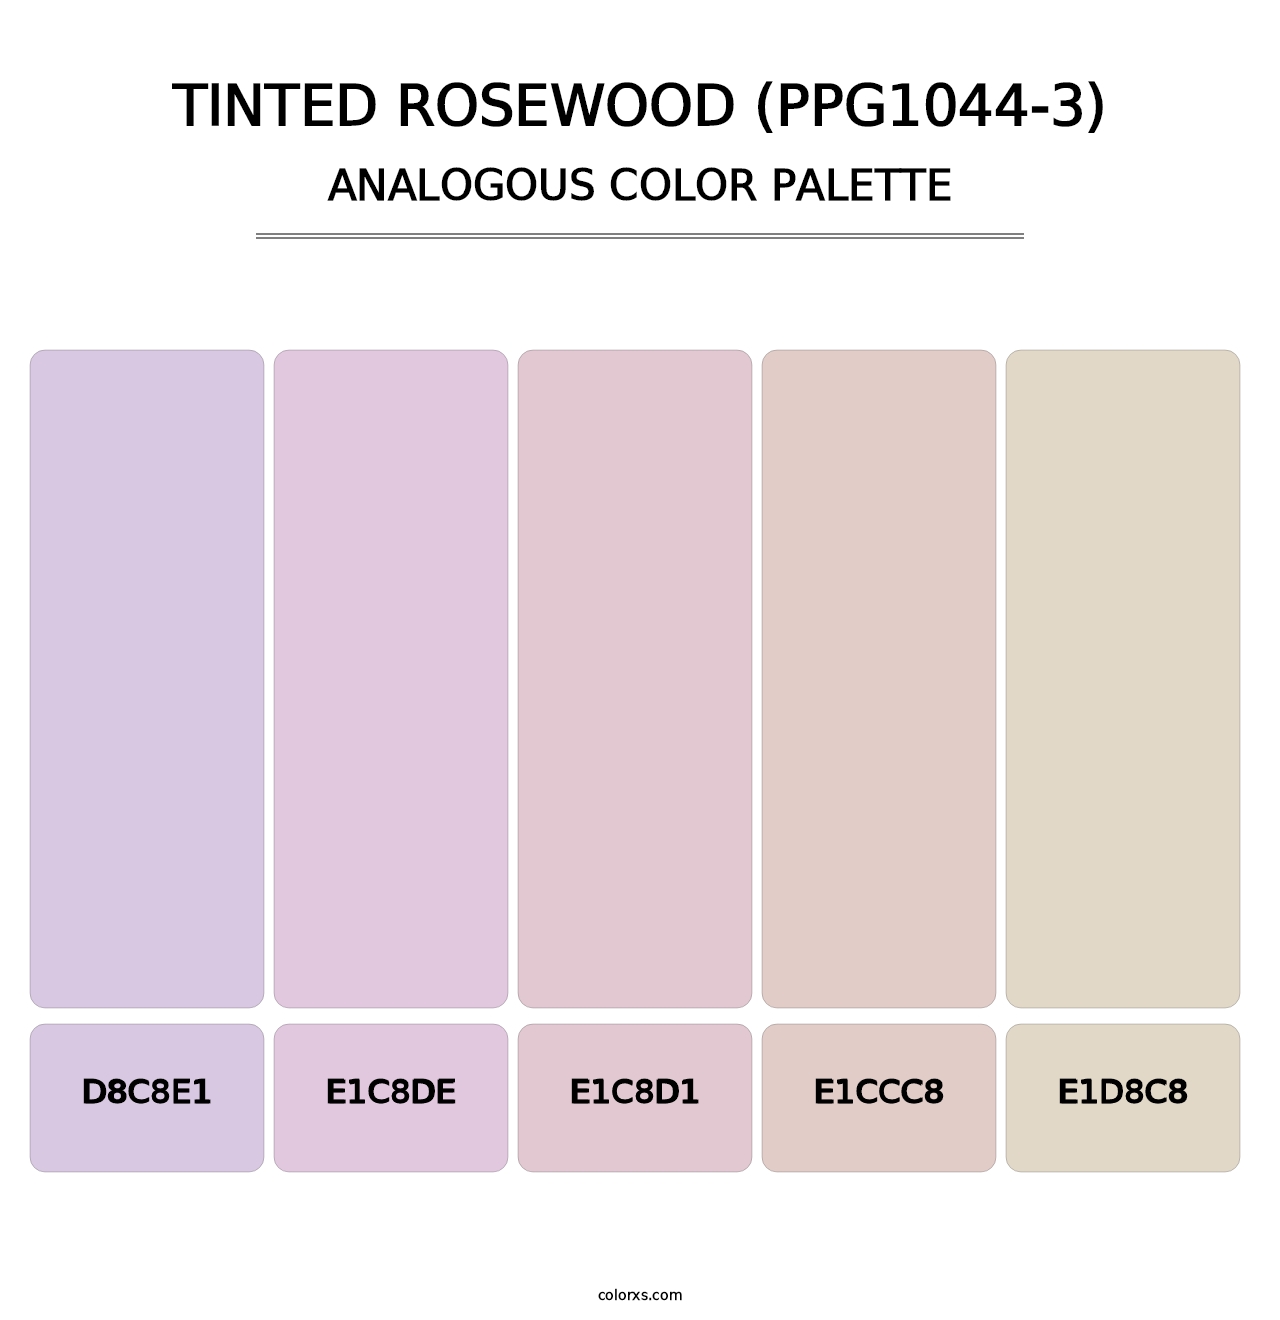 Tinted Rosewood (PPG1044-3) - Analogous Color Palette